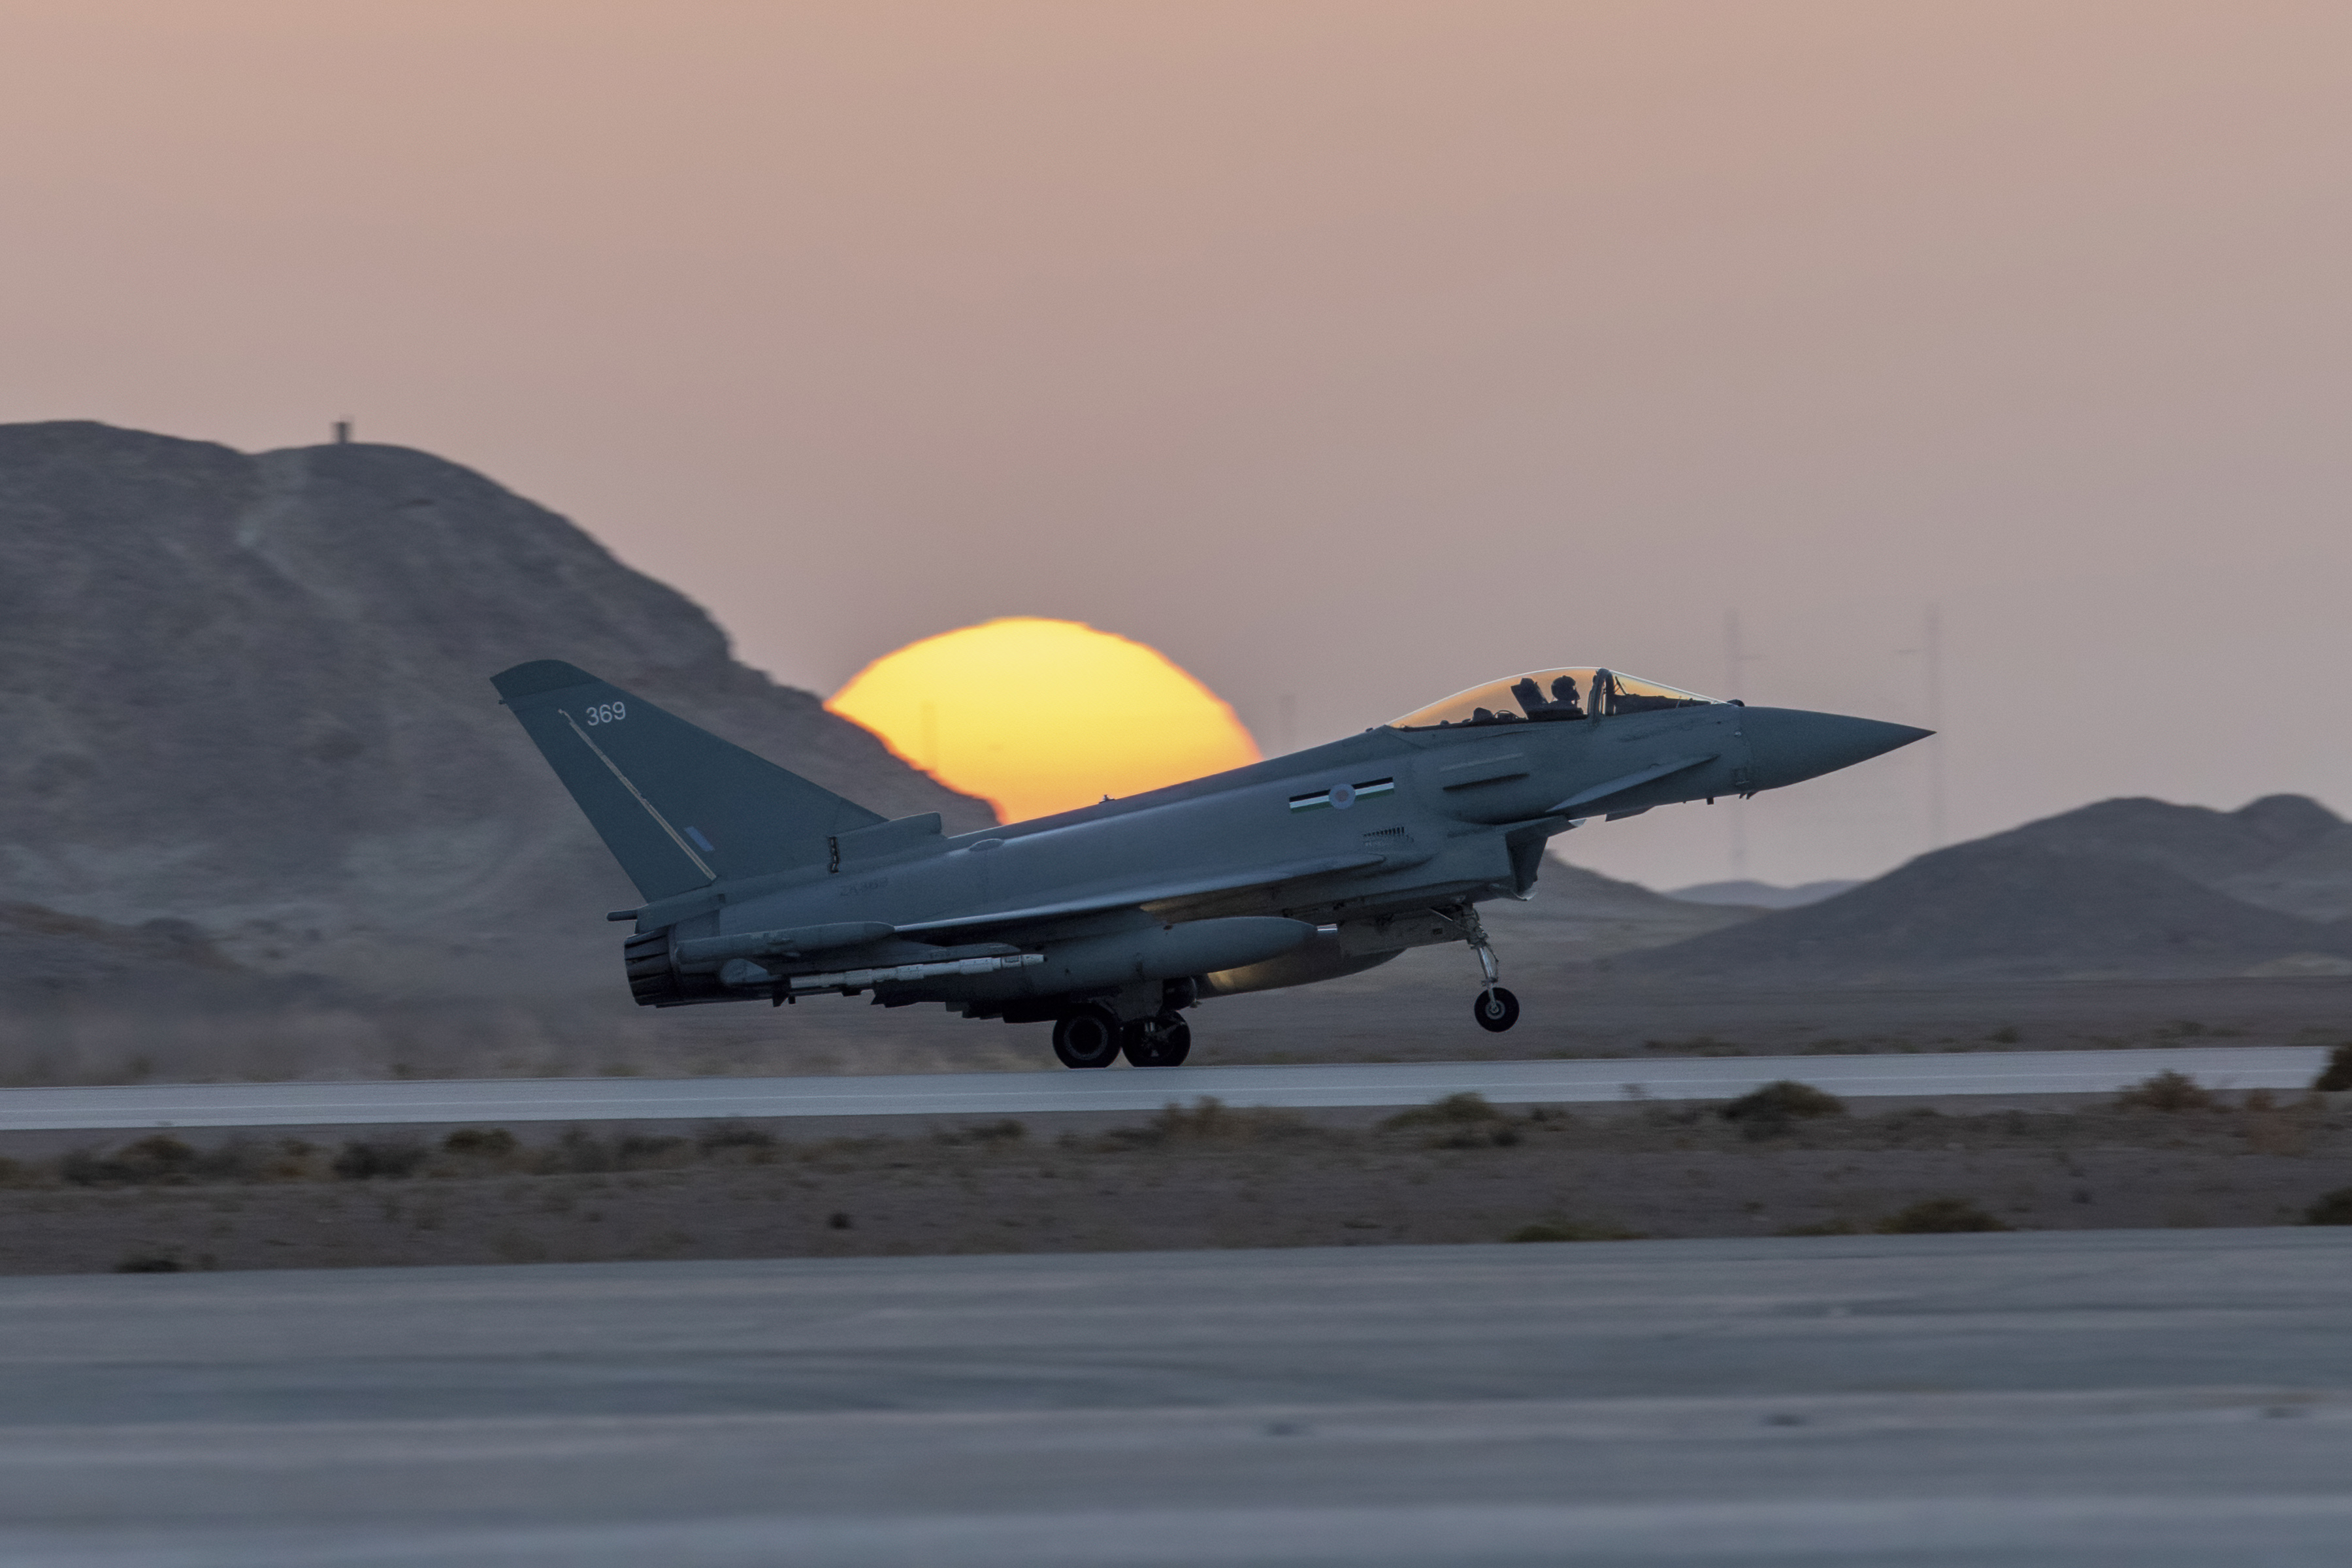 Typhoon taking off in the sunset.